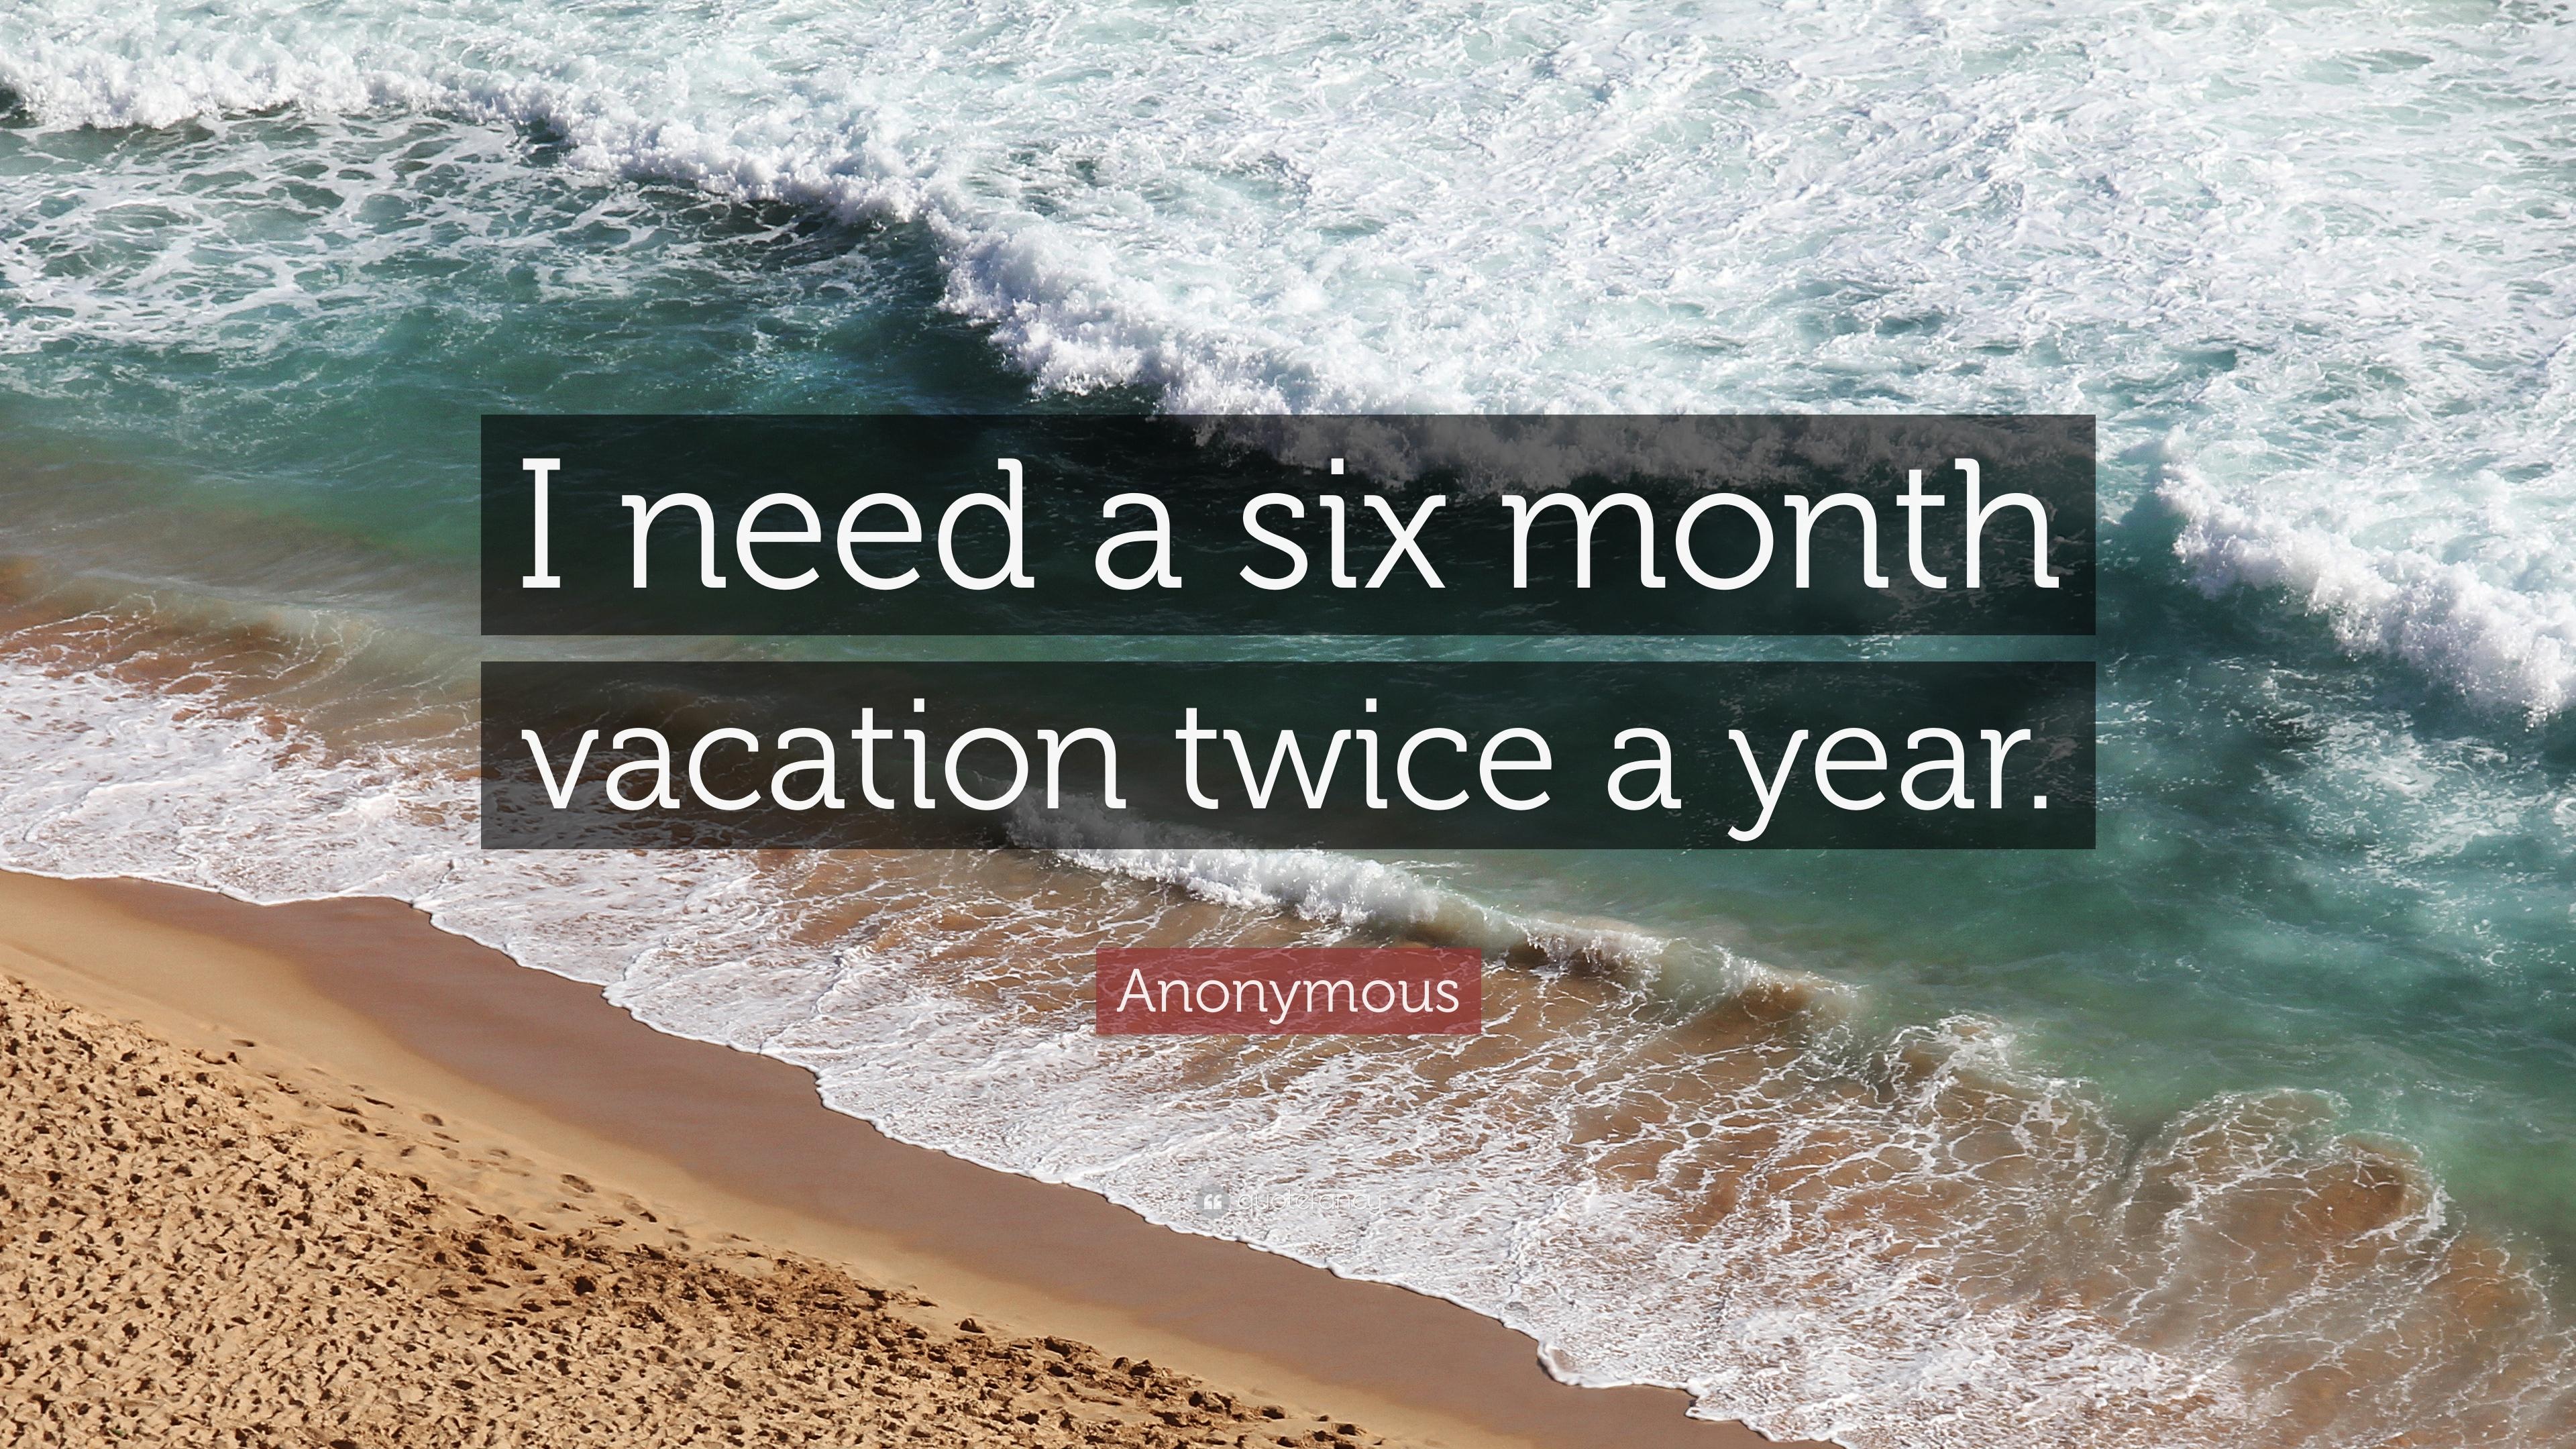 Anonymous Quote: “I need a six month vacation twice a year.” 17